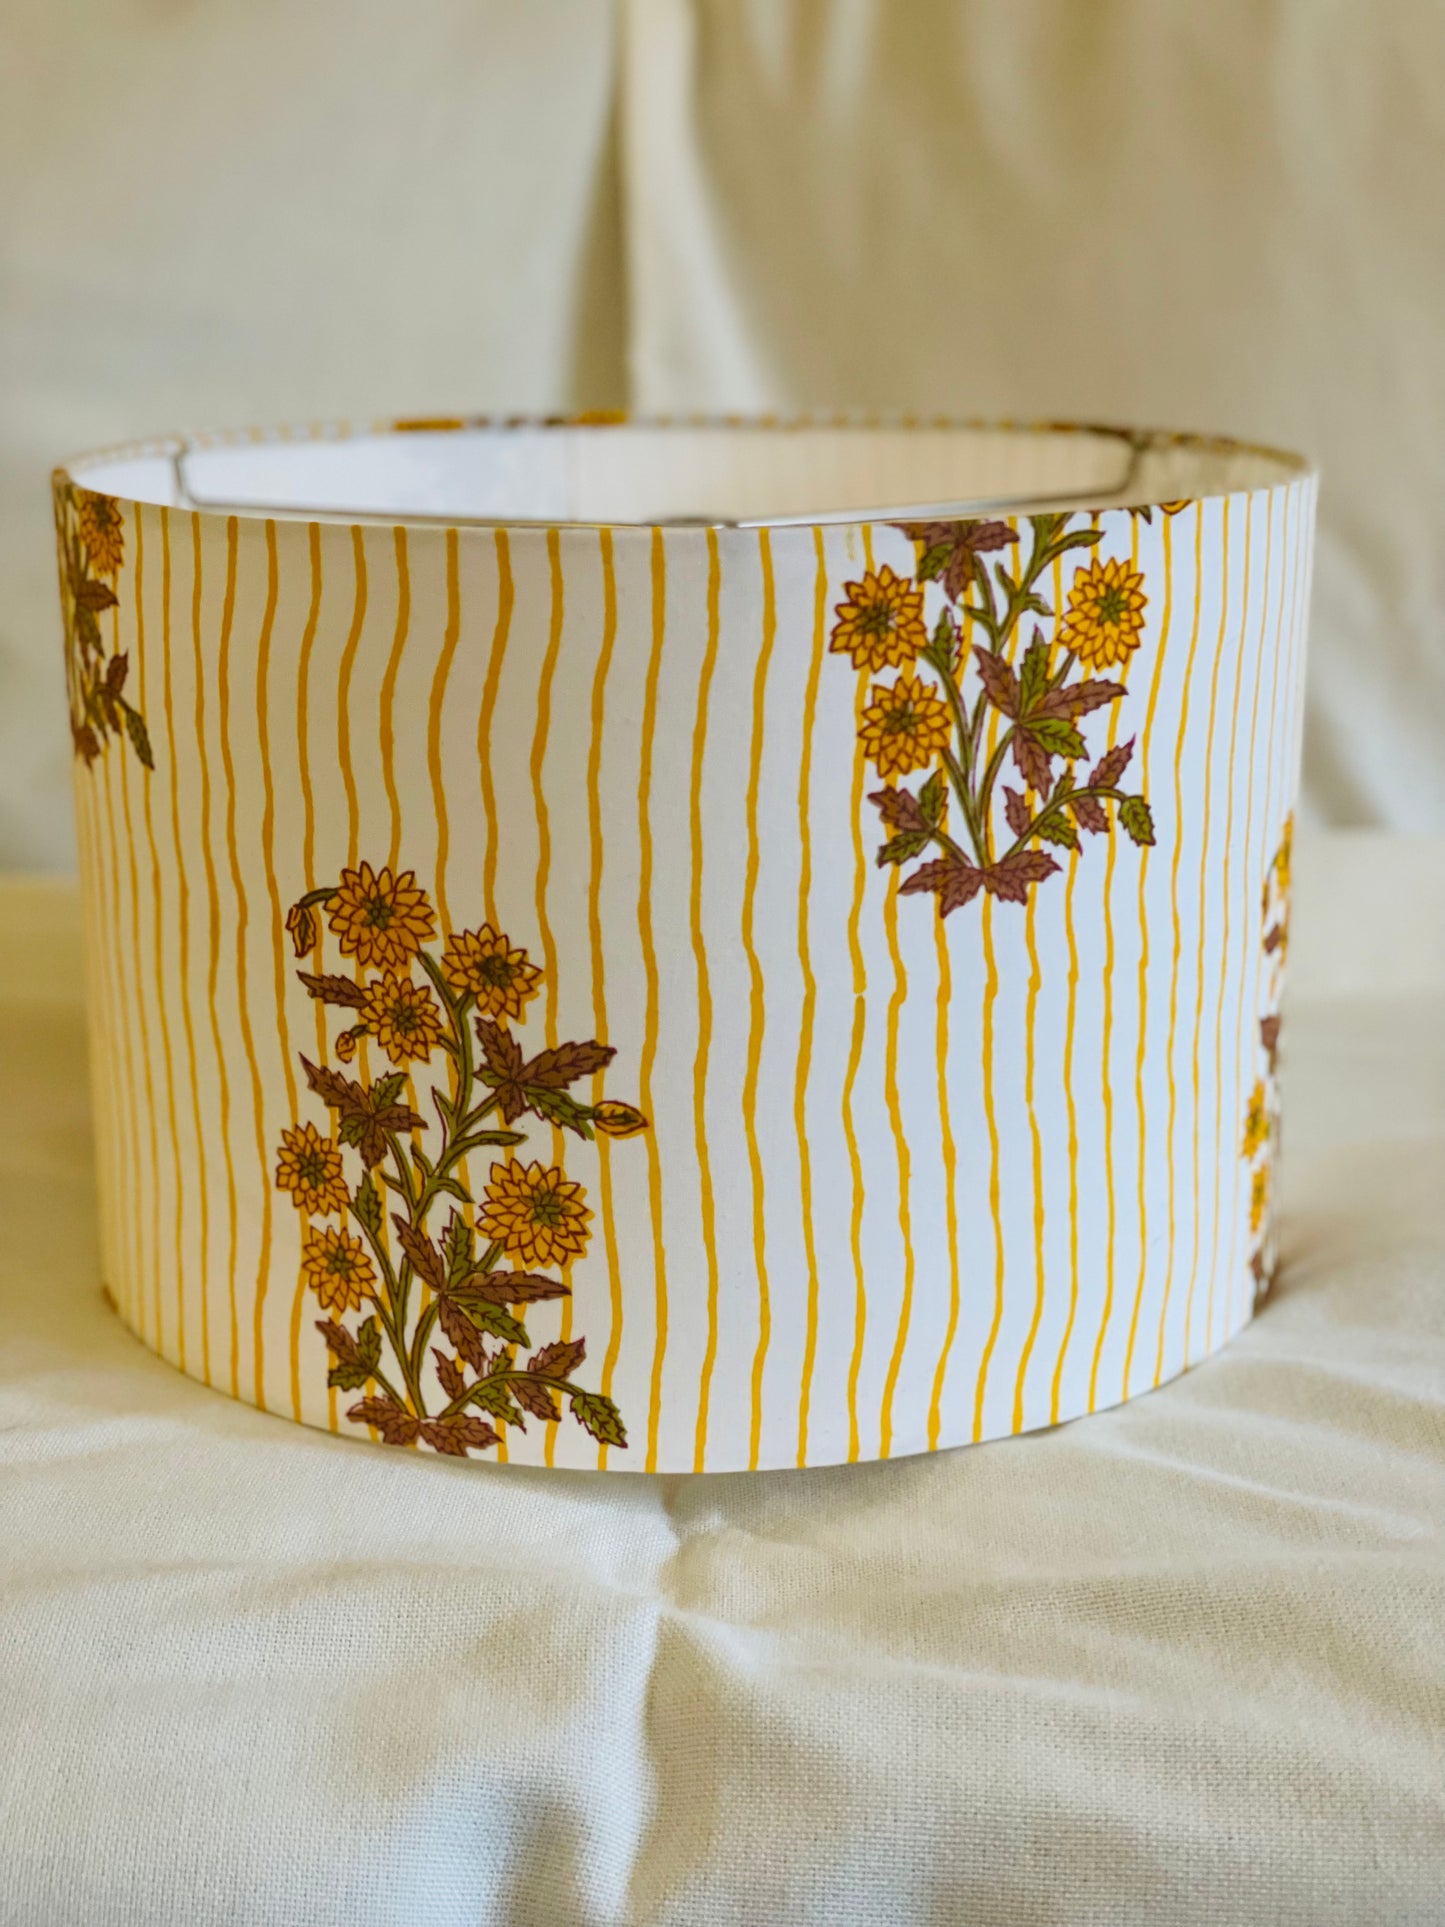 12 Inch Drum Shade. Indian Block print from Jaipur. Harvest Gold, Ginger, and Olive Floral Stripe.